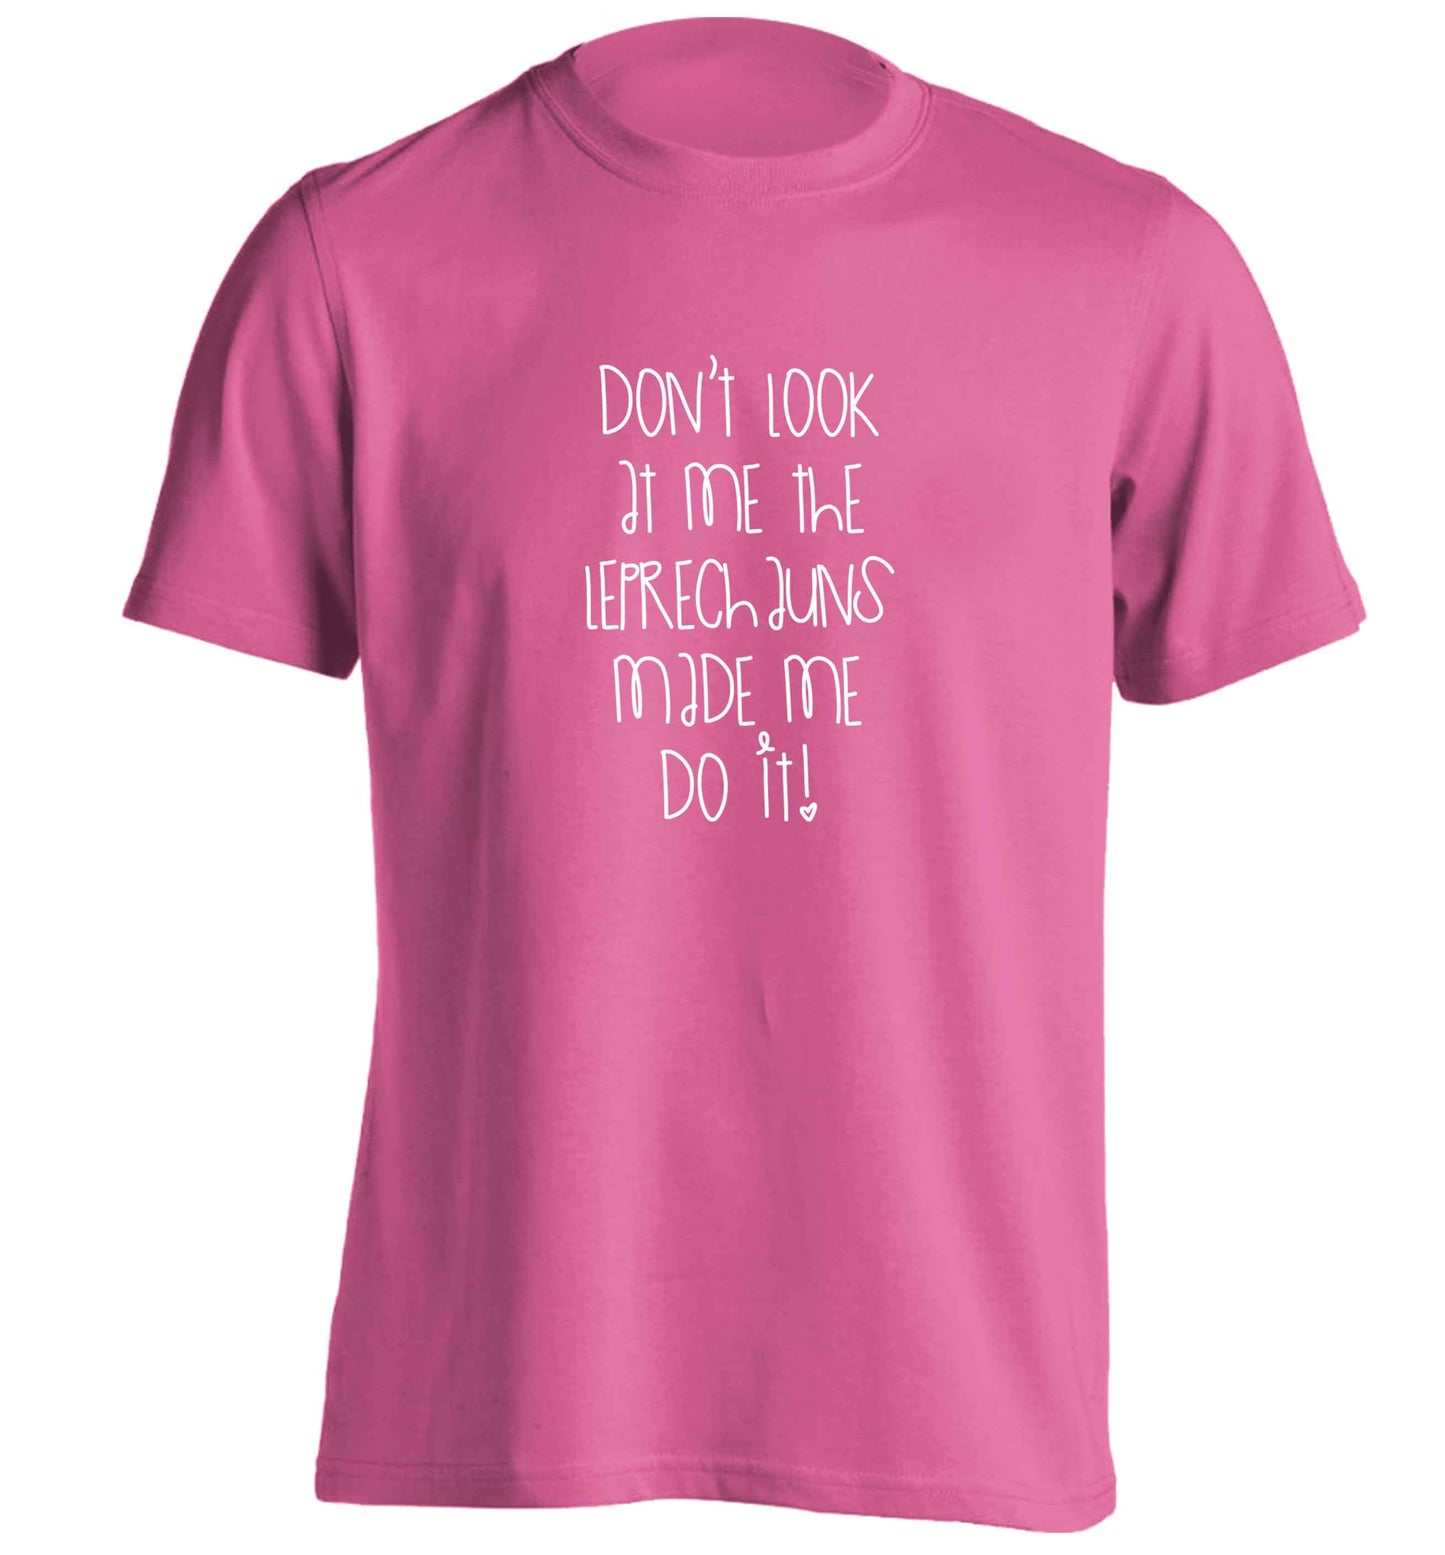 Don't look at me the leprechauns made me do it adults unisex pink Tshirt 2XL